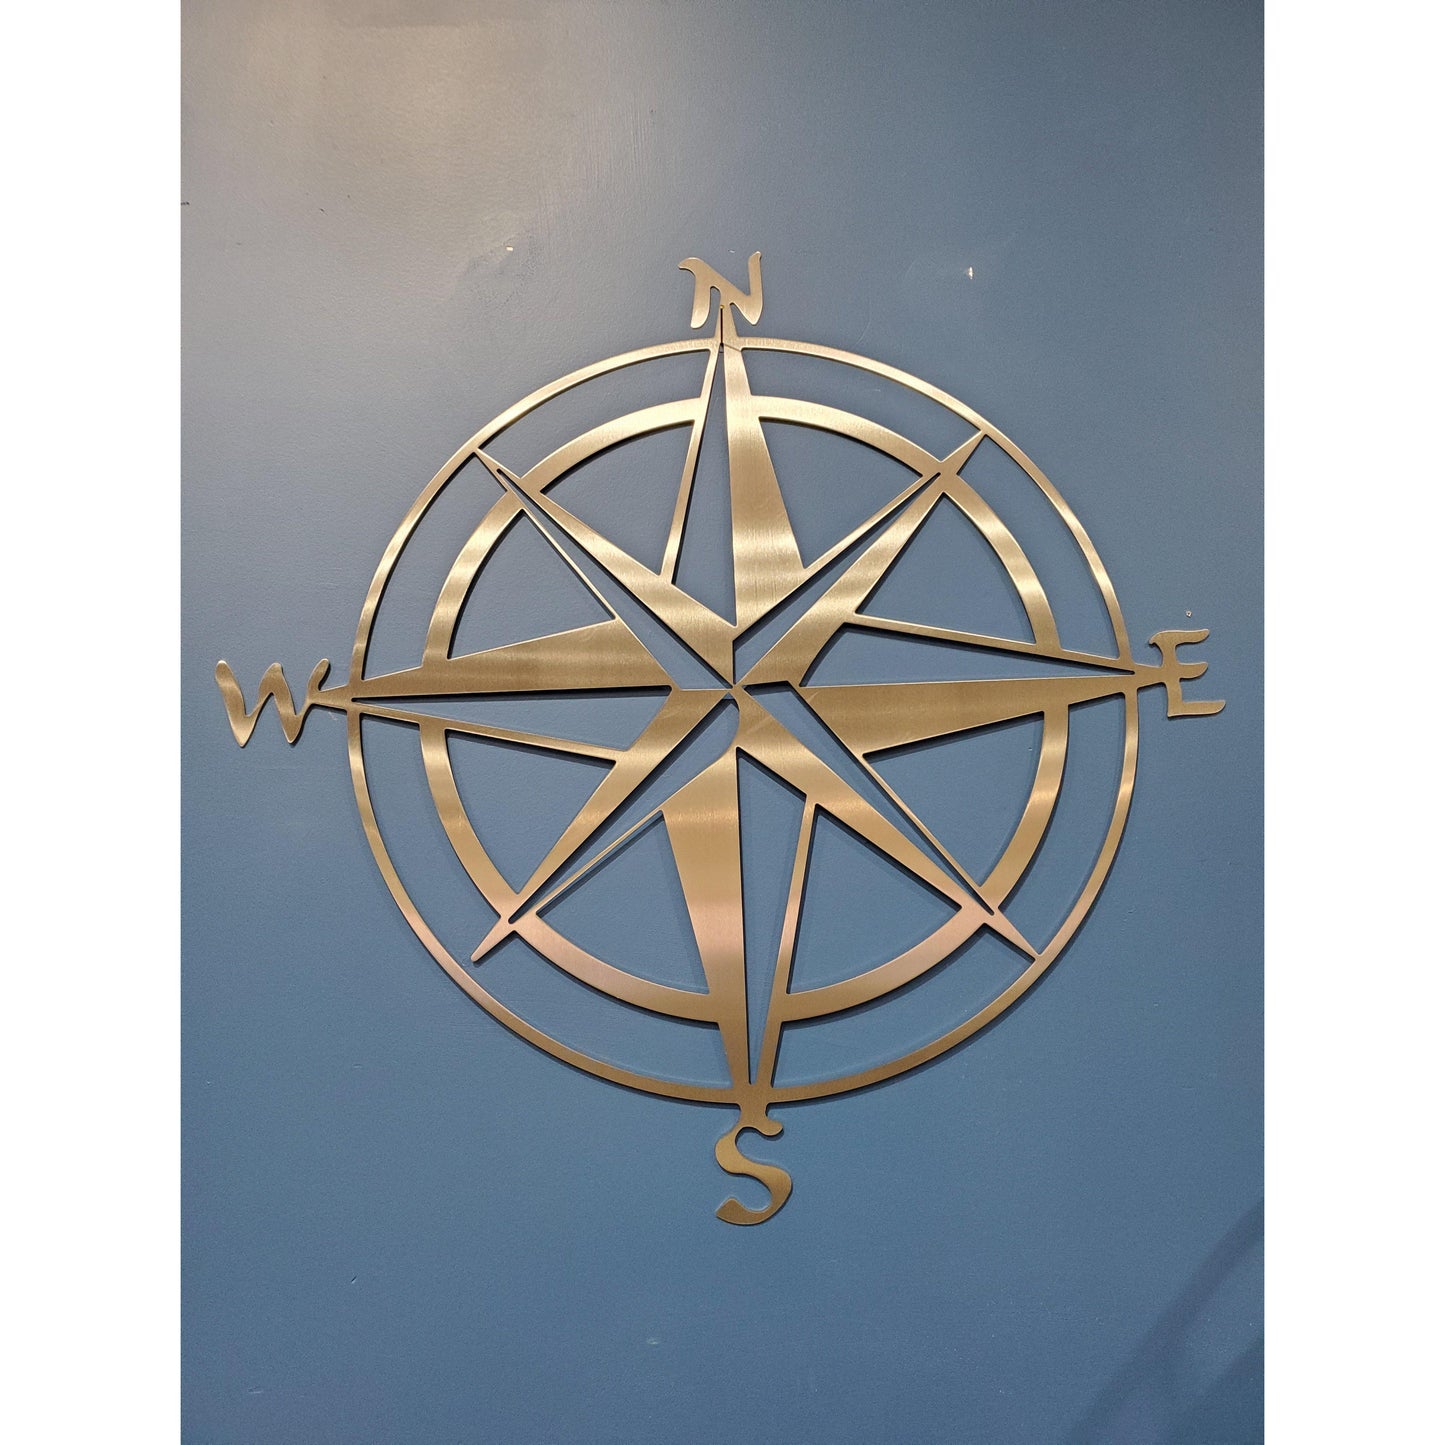 Nautical Stainless Steel Compass Rose Metal Wall Art - Home Decor-Home Decor-Cascade Manufacturing